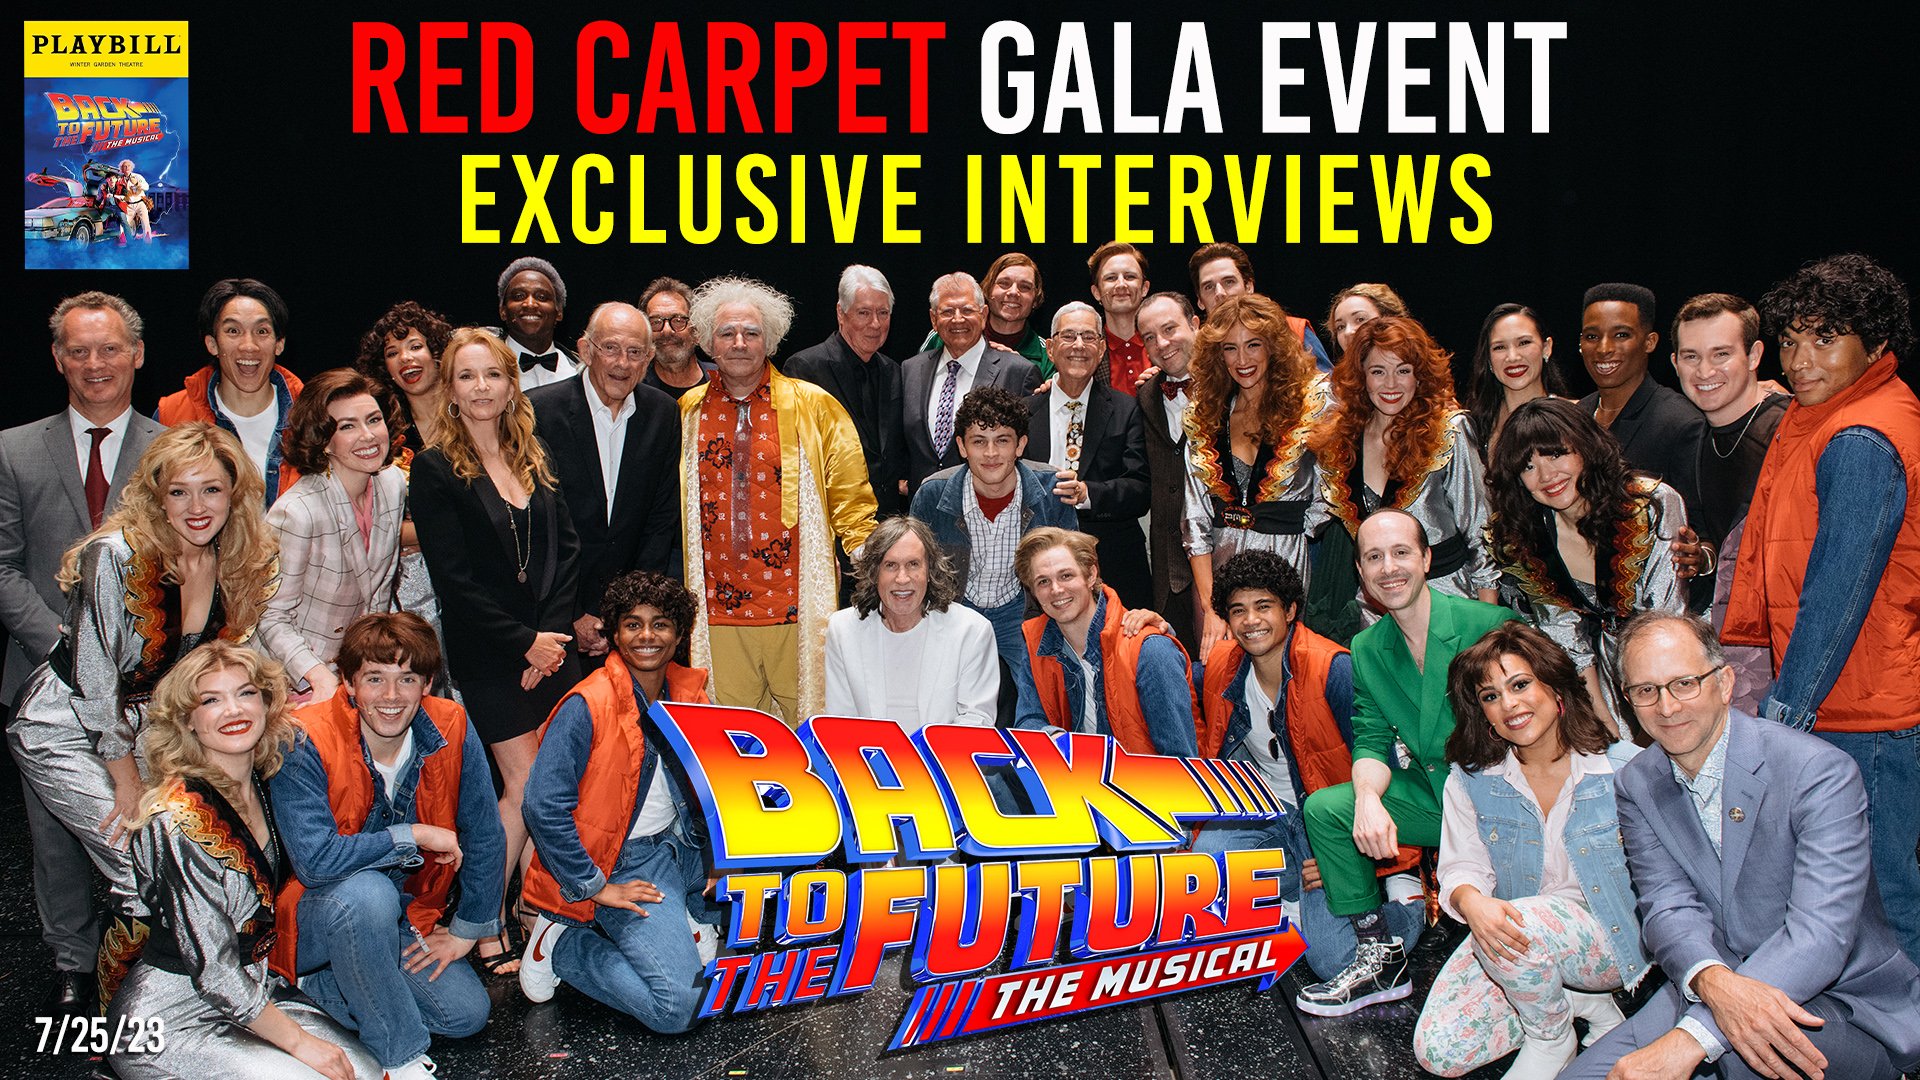 Red Carpet Gala Event - Exclusive Interviews